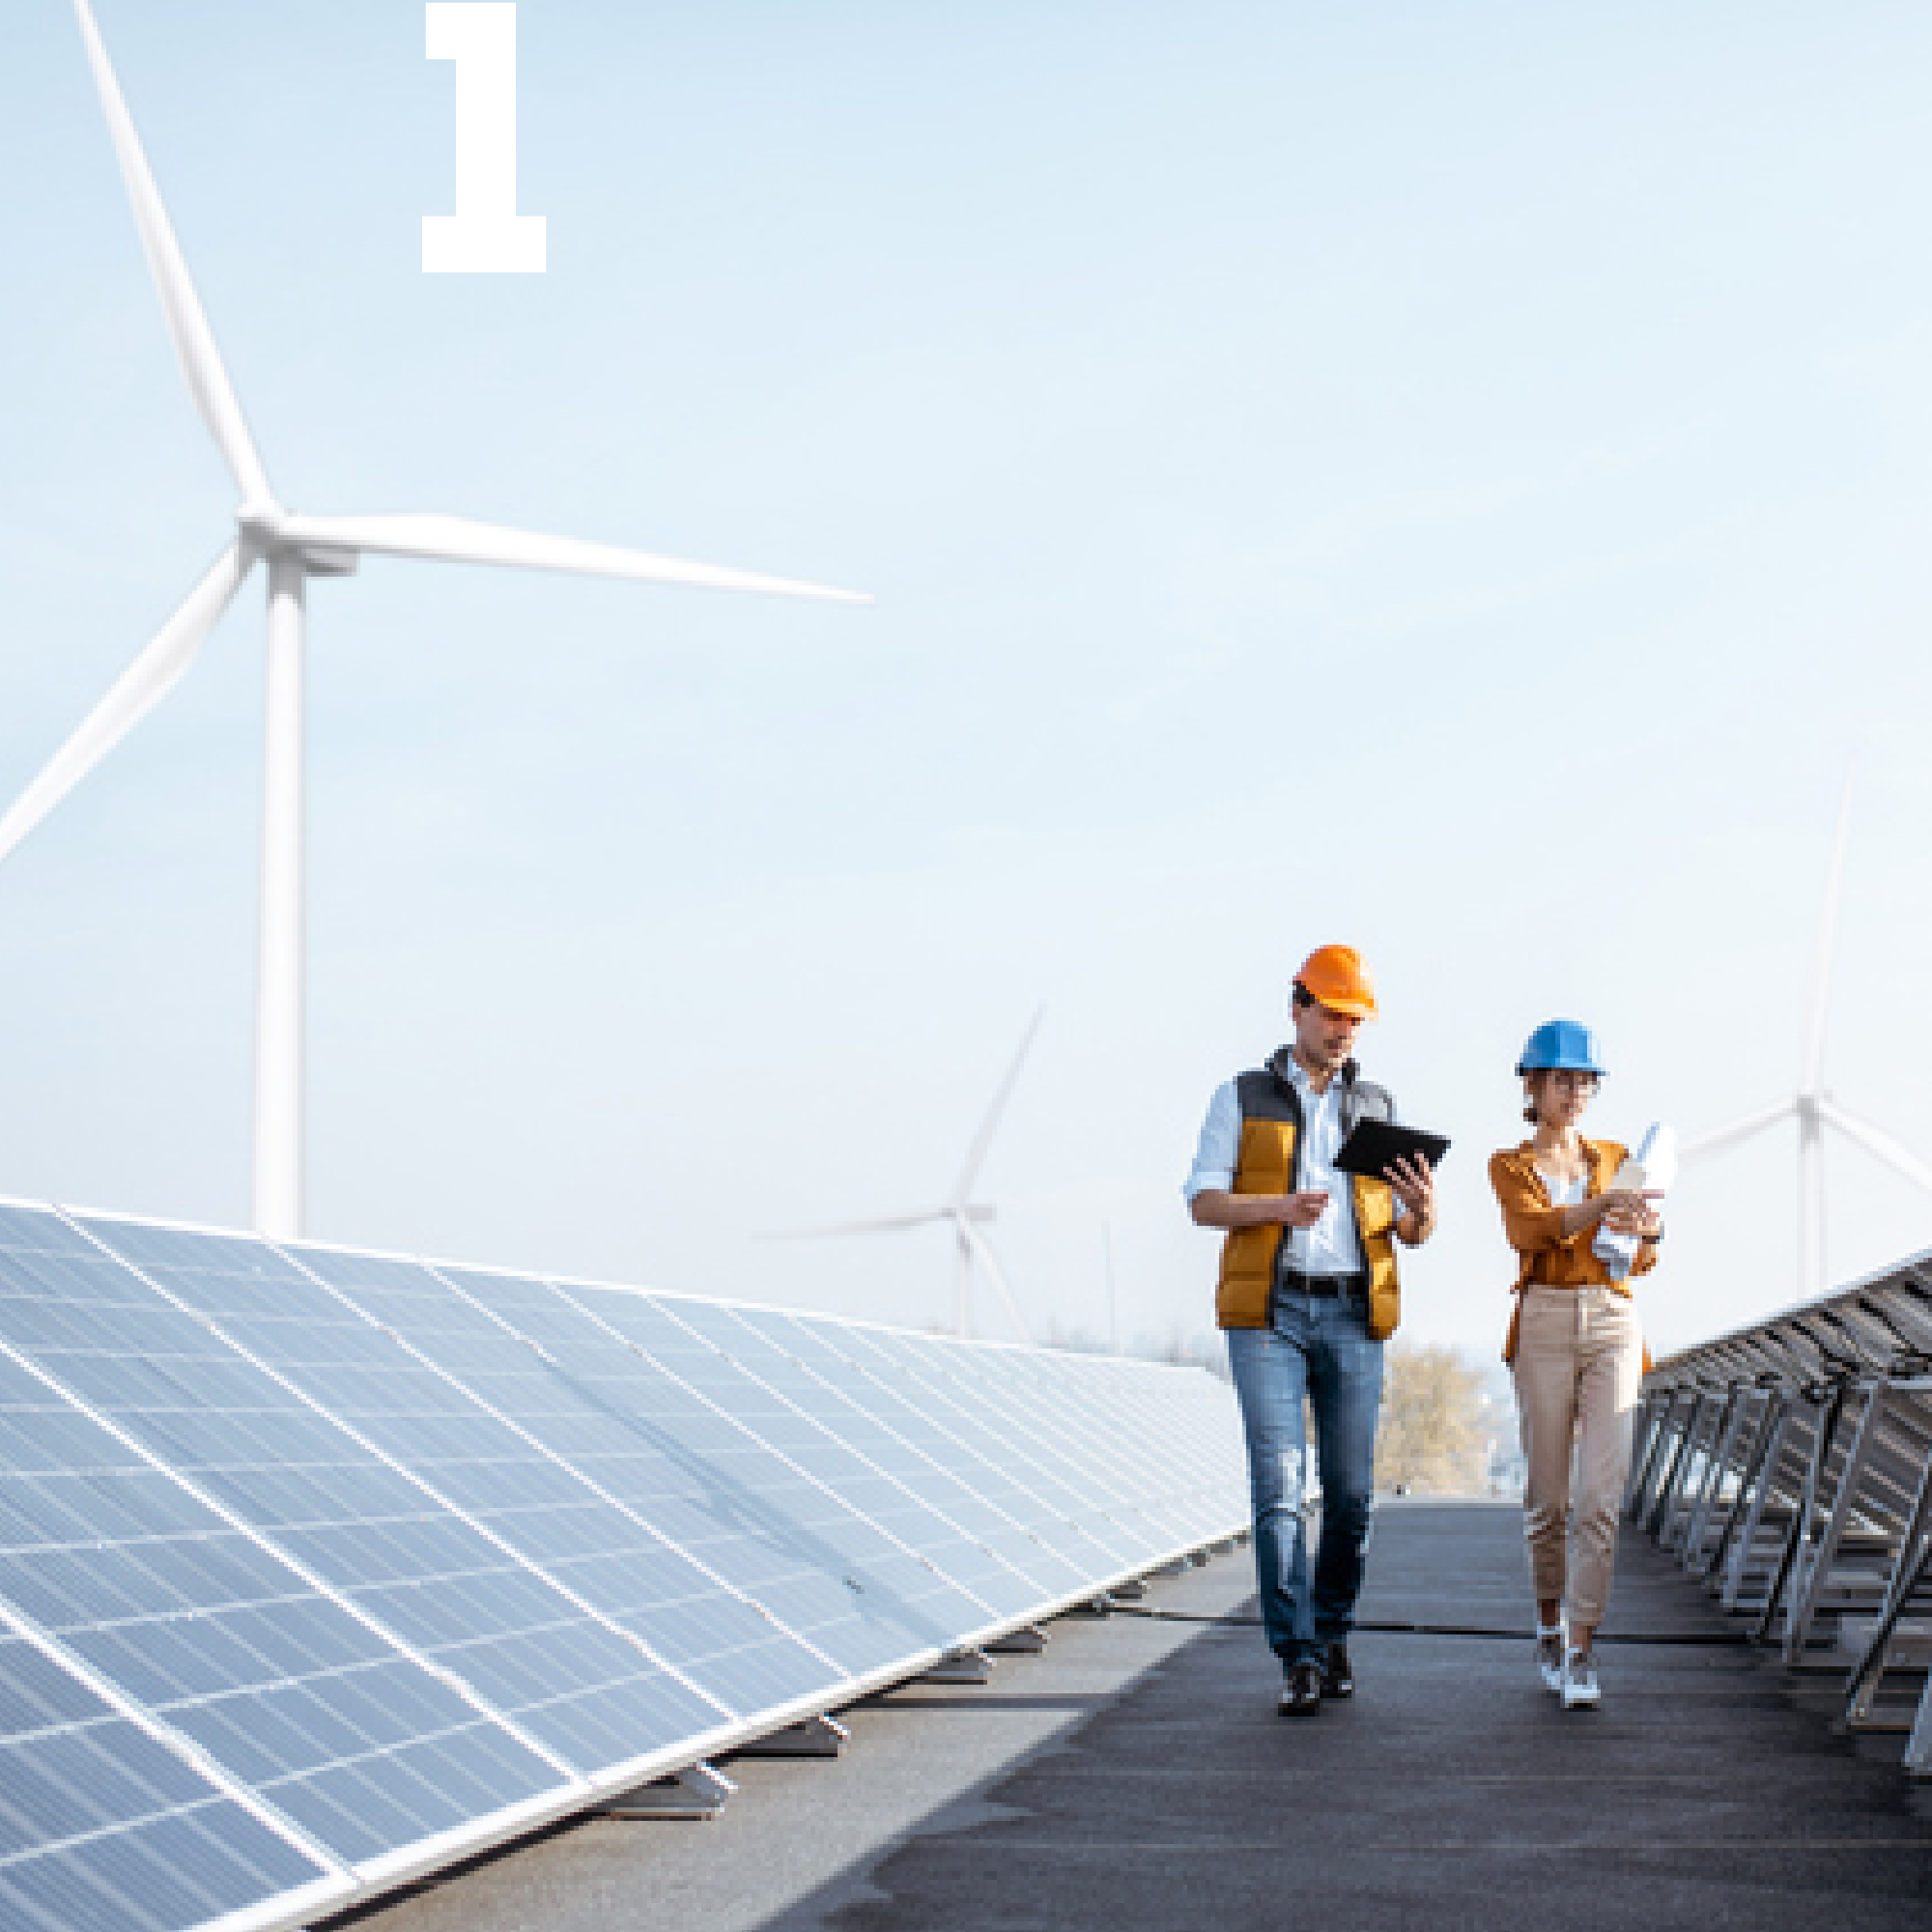 Two people wearing safety helmets walking in between solar panels and windmills